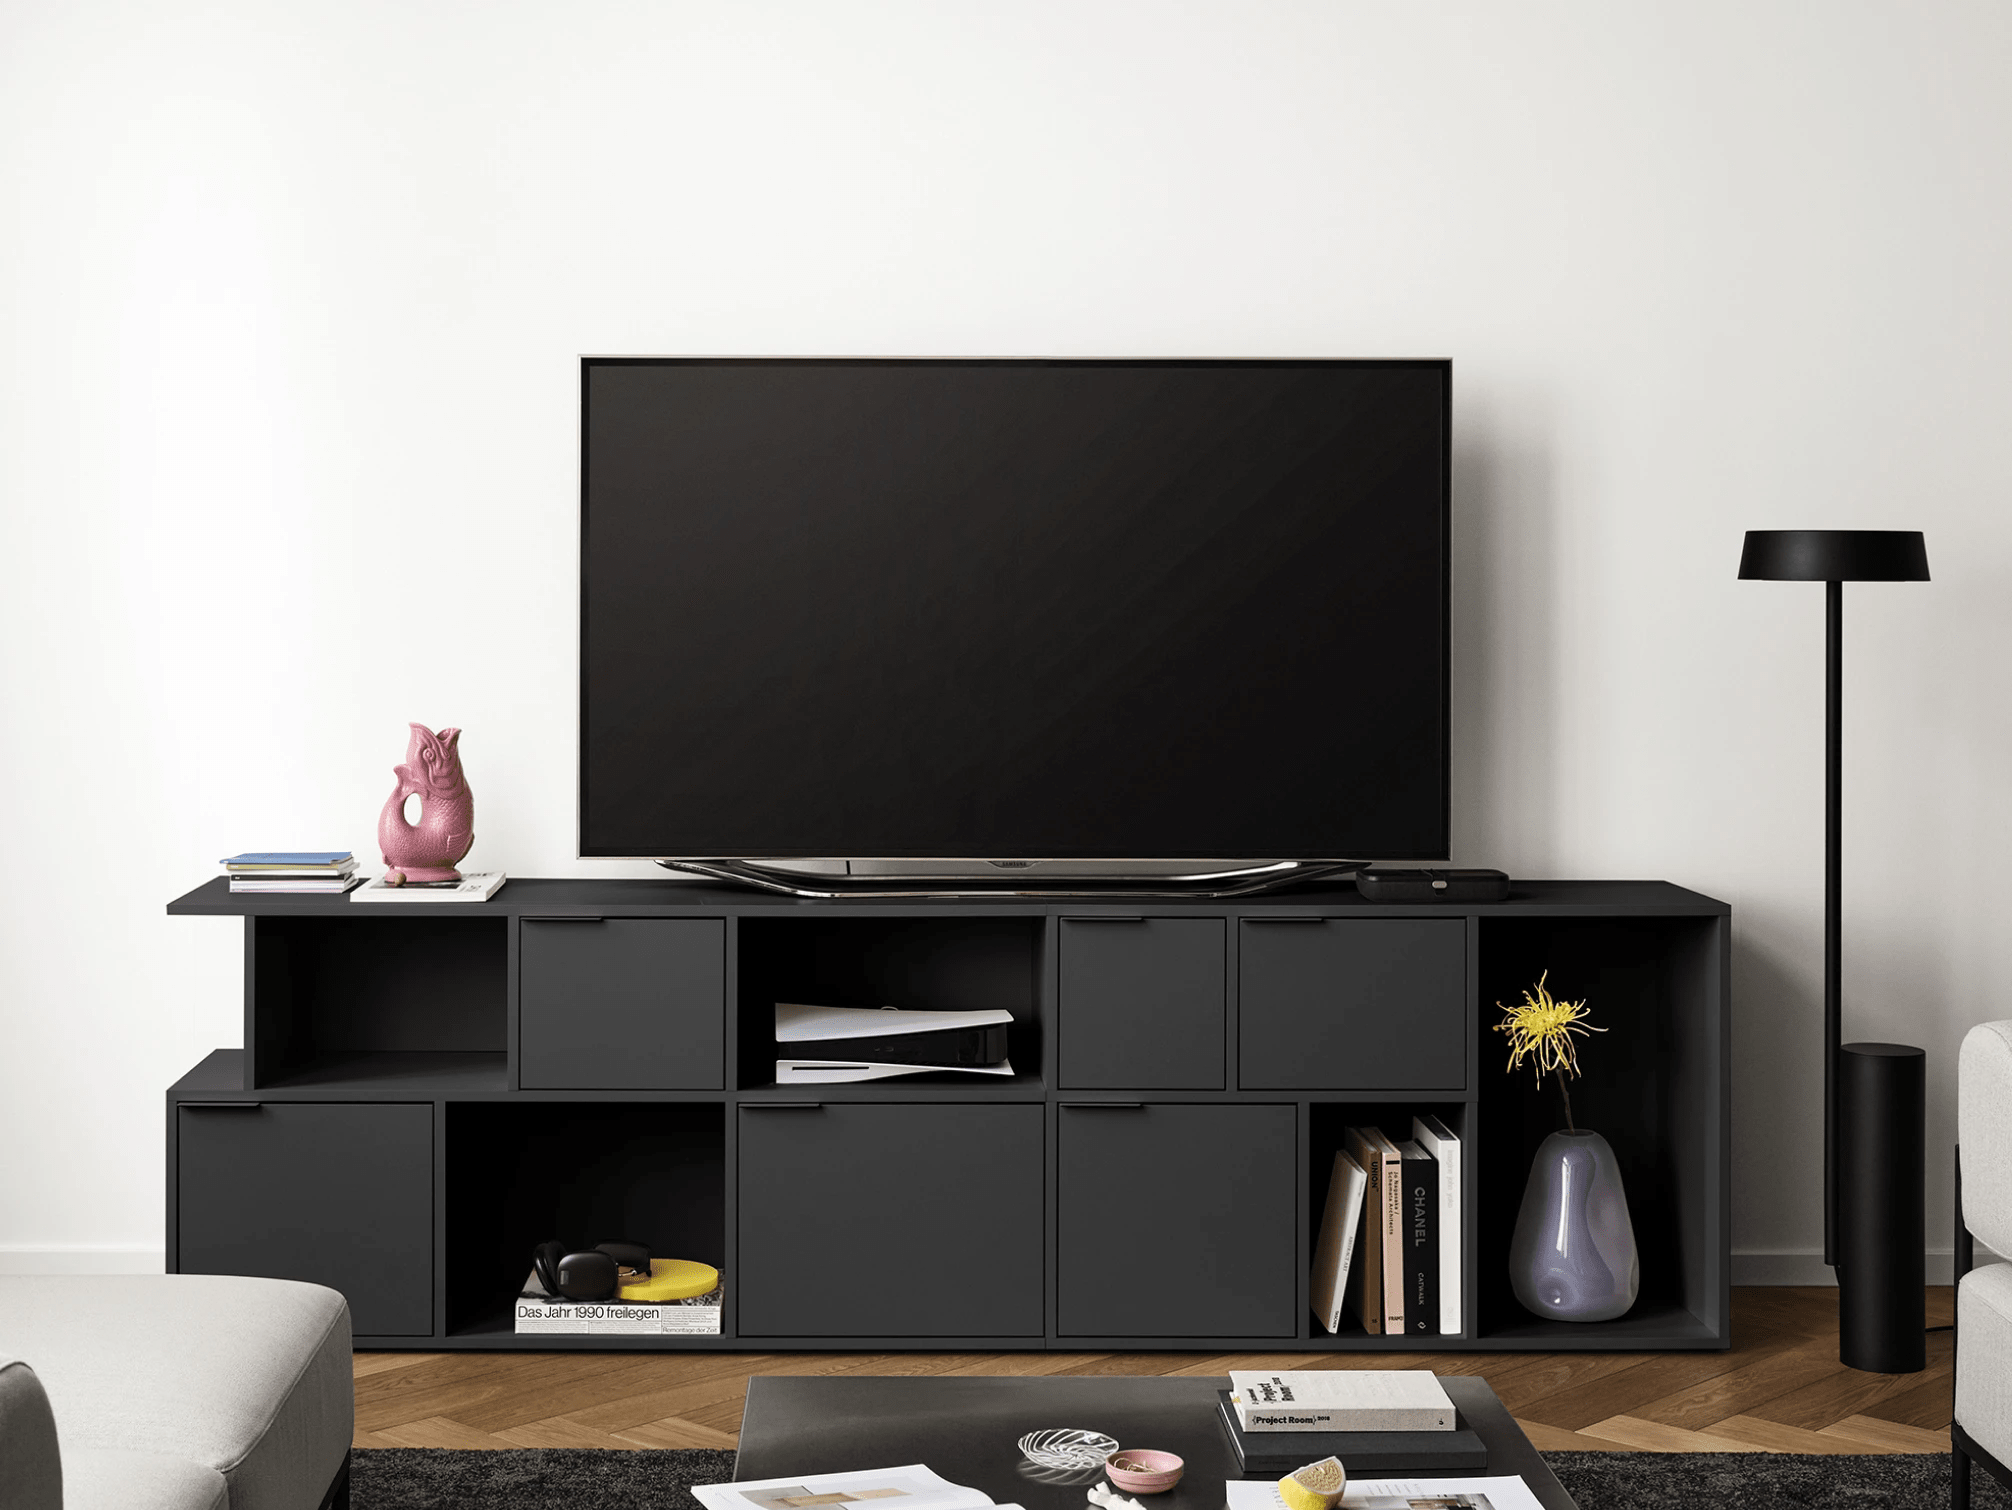 Common_Matte_Black Tv Stand with Drawers and Backpanels - 130x53x32cm 1